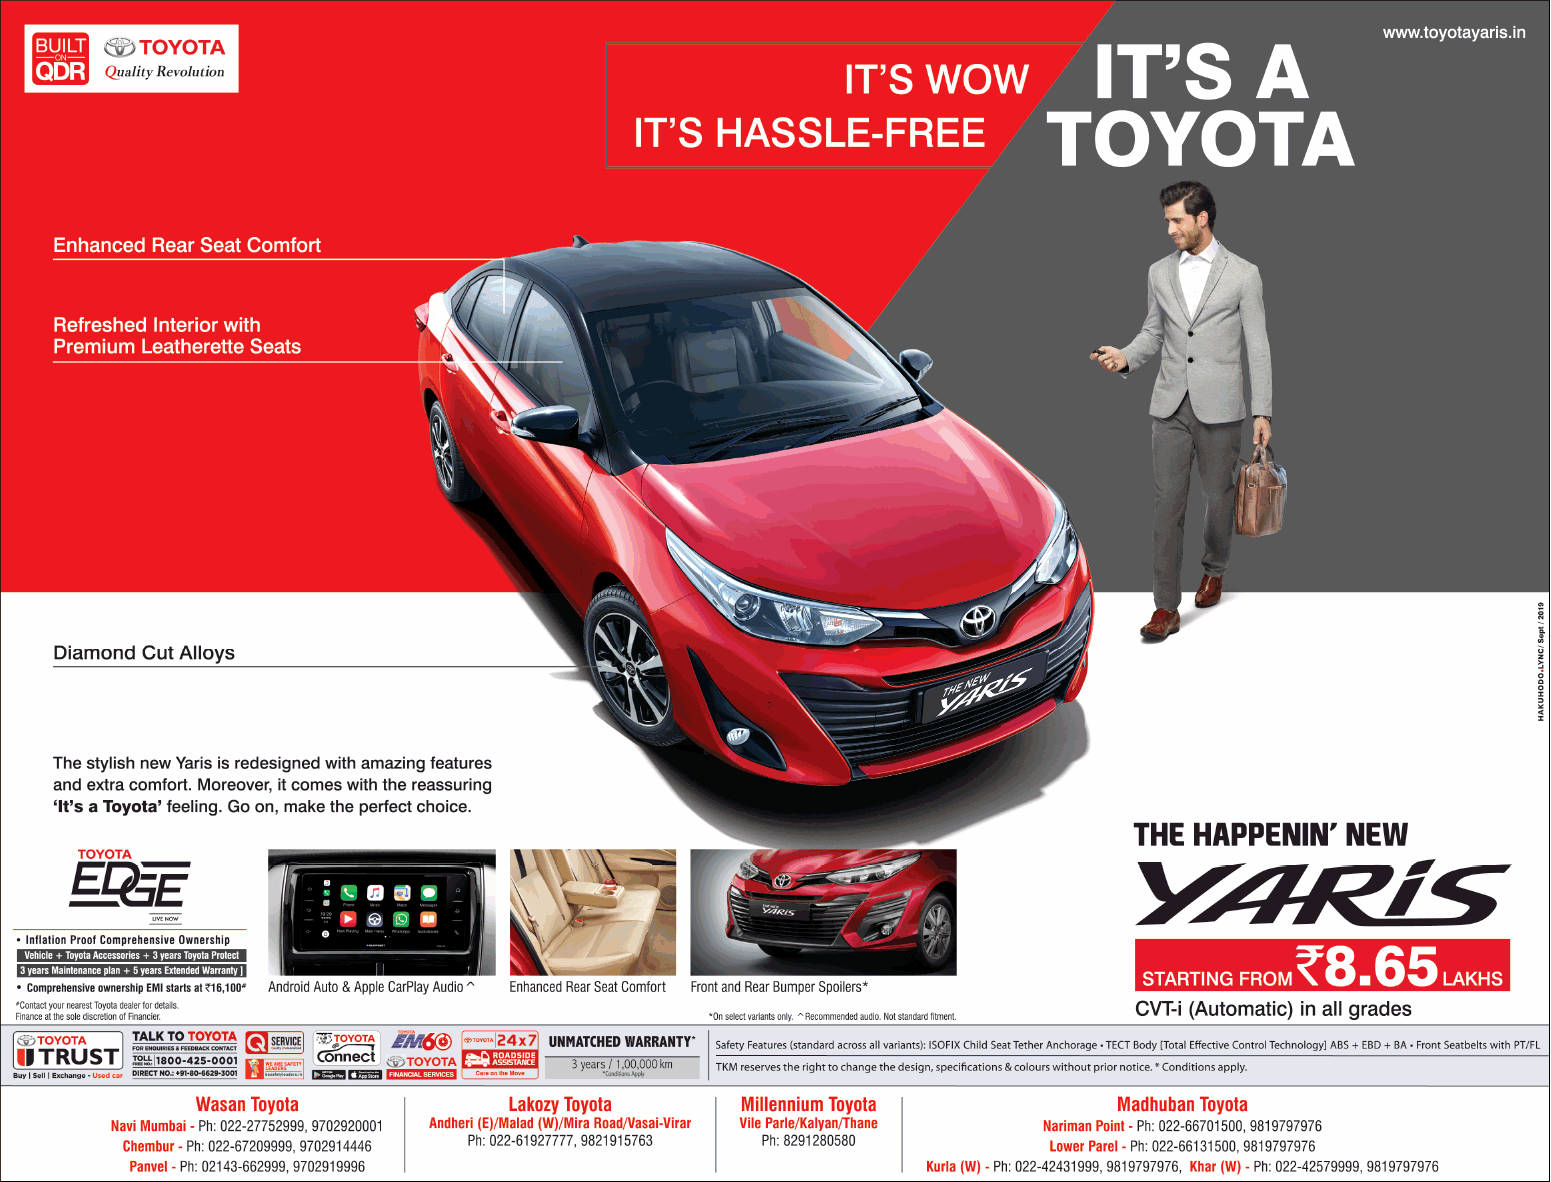 toyota-yaris-starting-from-rs-8.65-lakhs-ad-delhi-times-04-09-2019.png